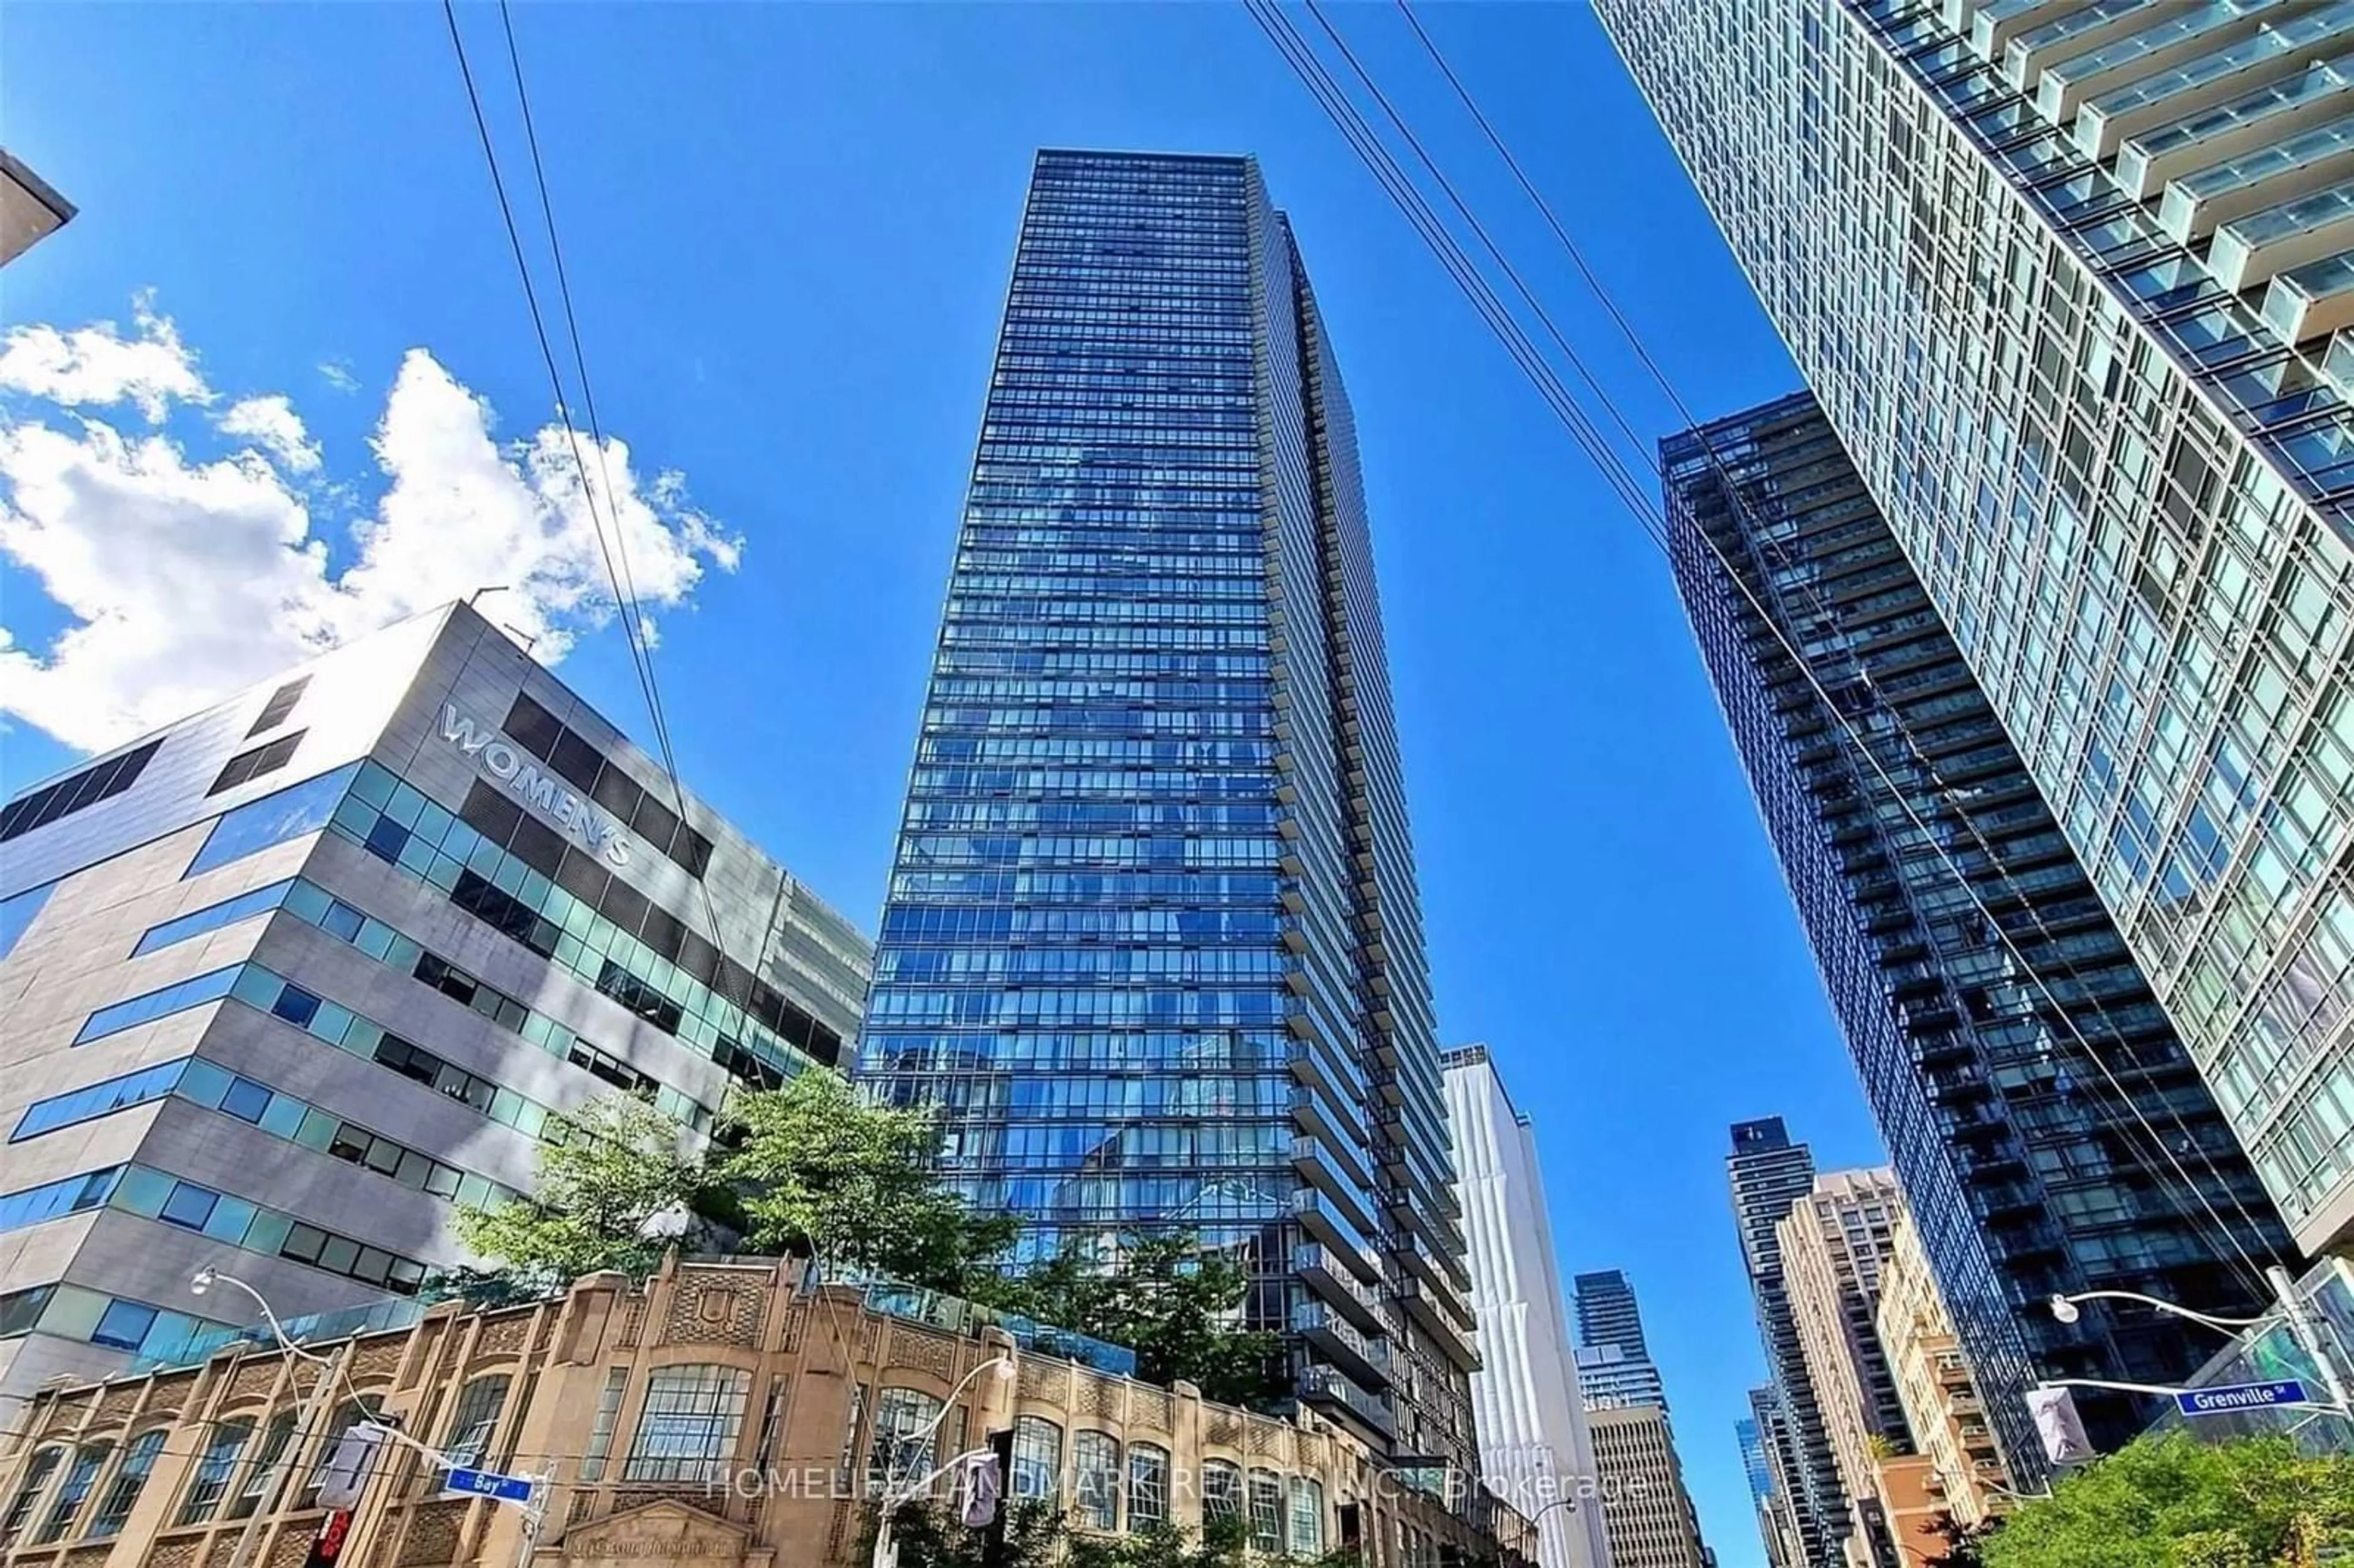 A pic from exterior of the house or condo for 832 Bay St #3606, Toronto Ontario M5S 1Z6